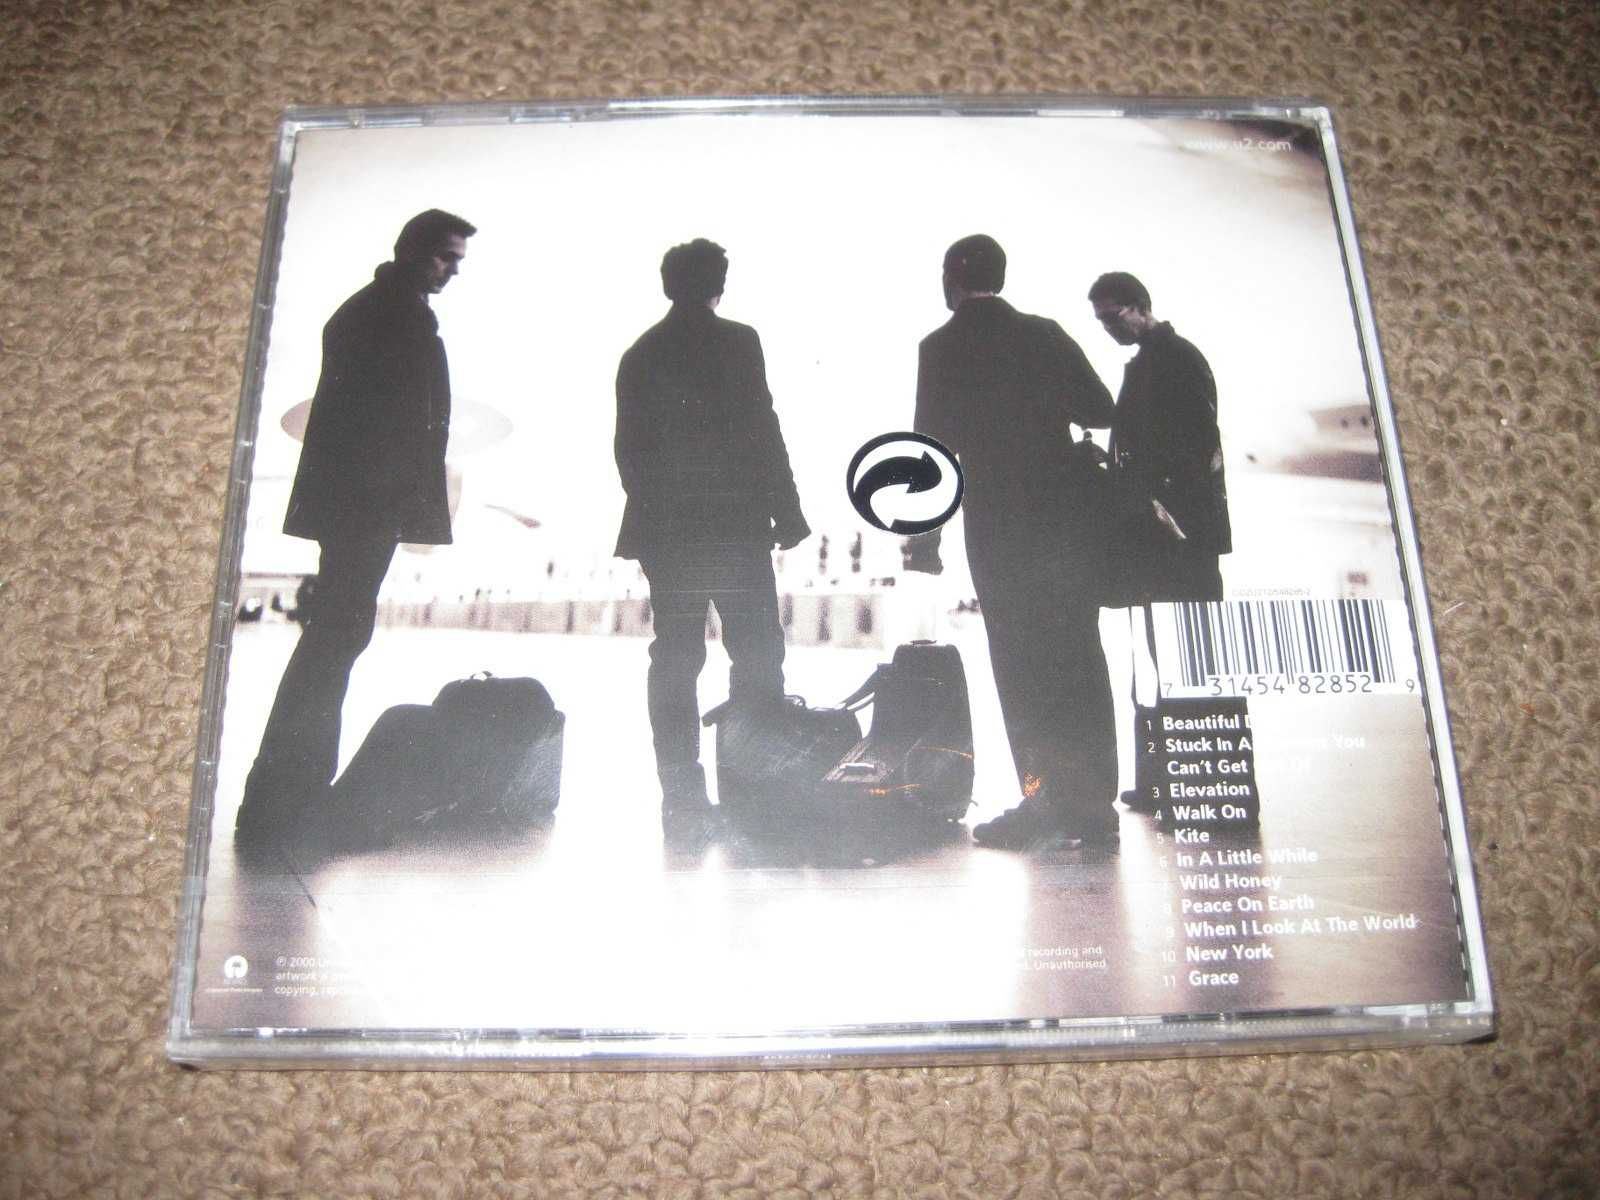 CD dos U2 "All That You Can't Leave Behind" Selado/Portes Grátis!